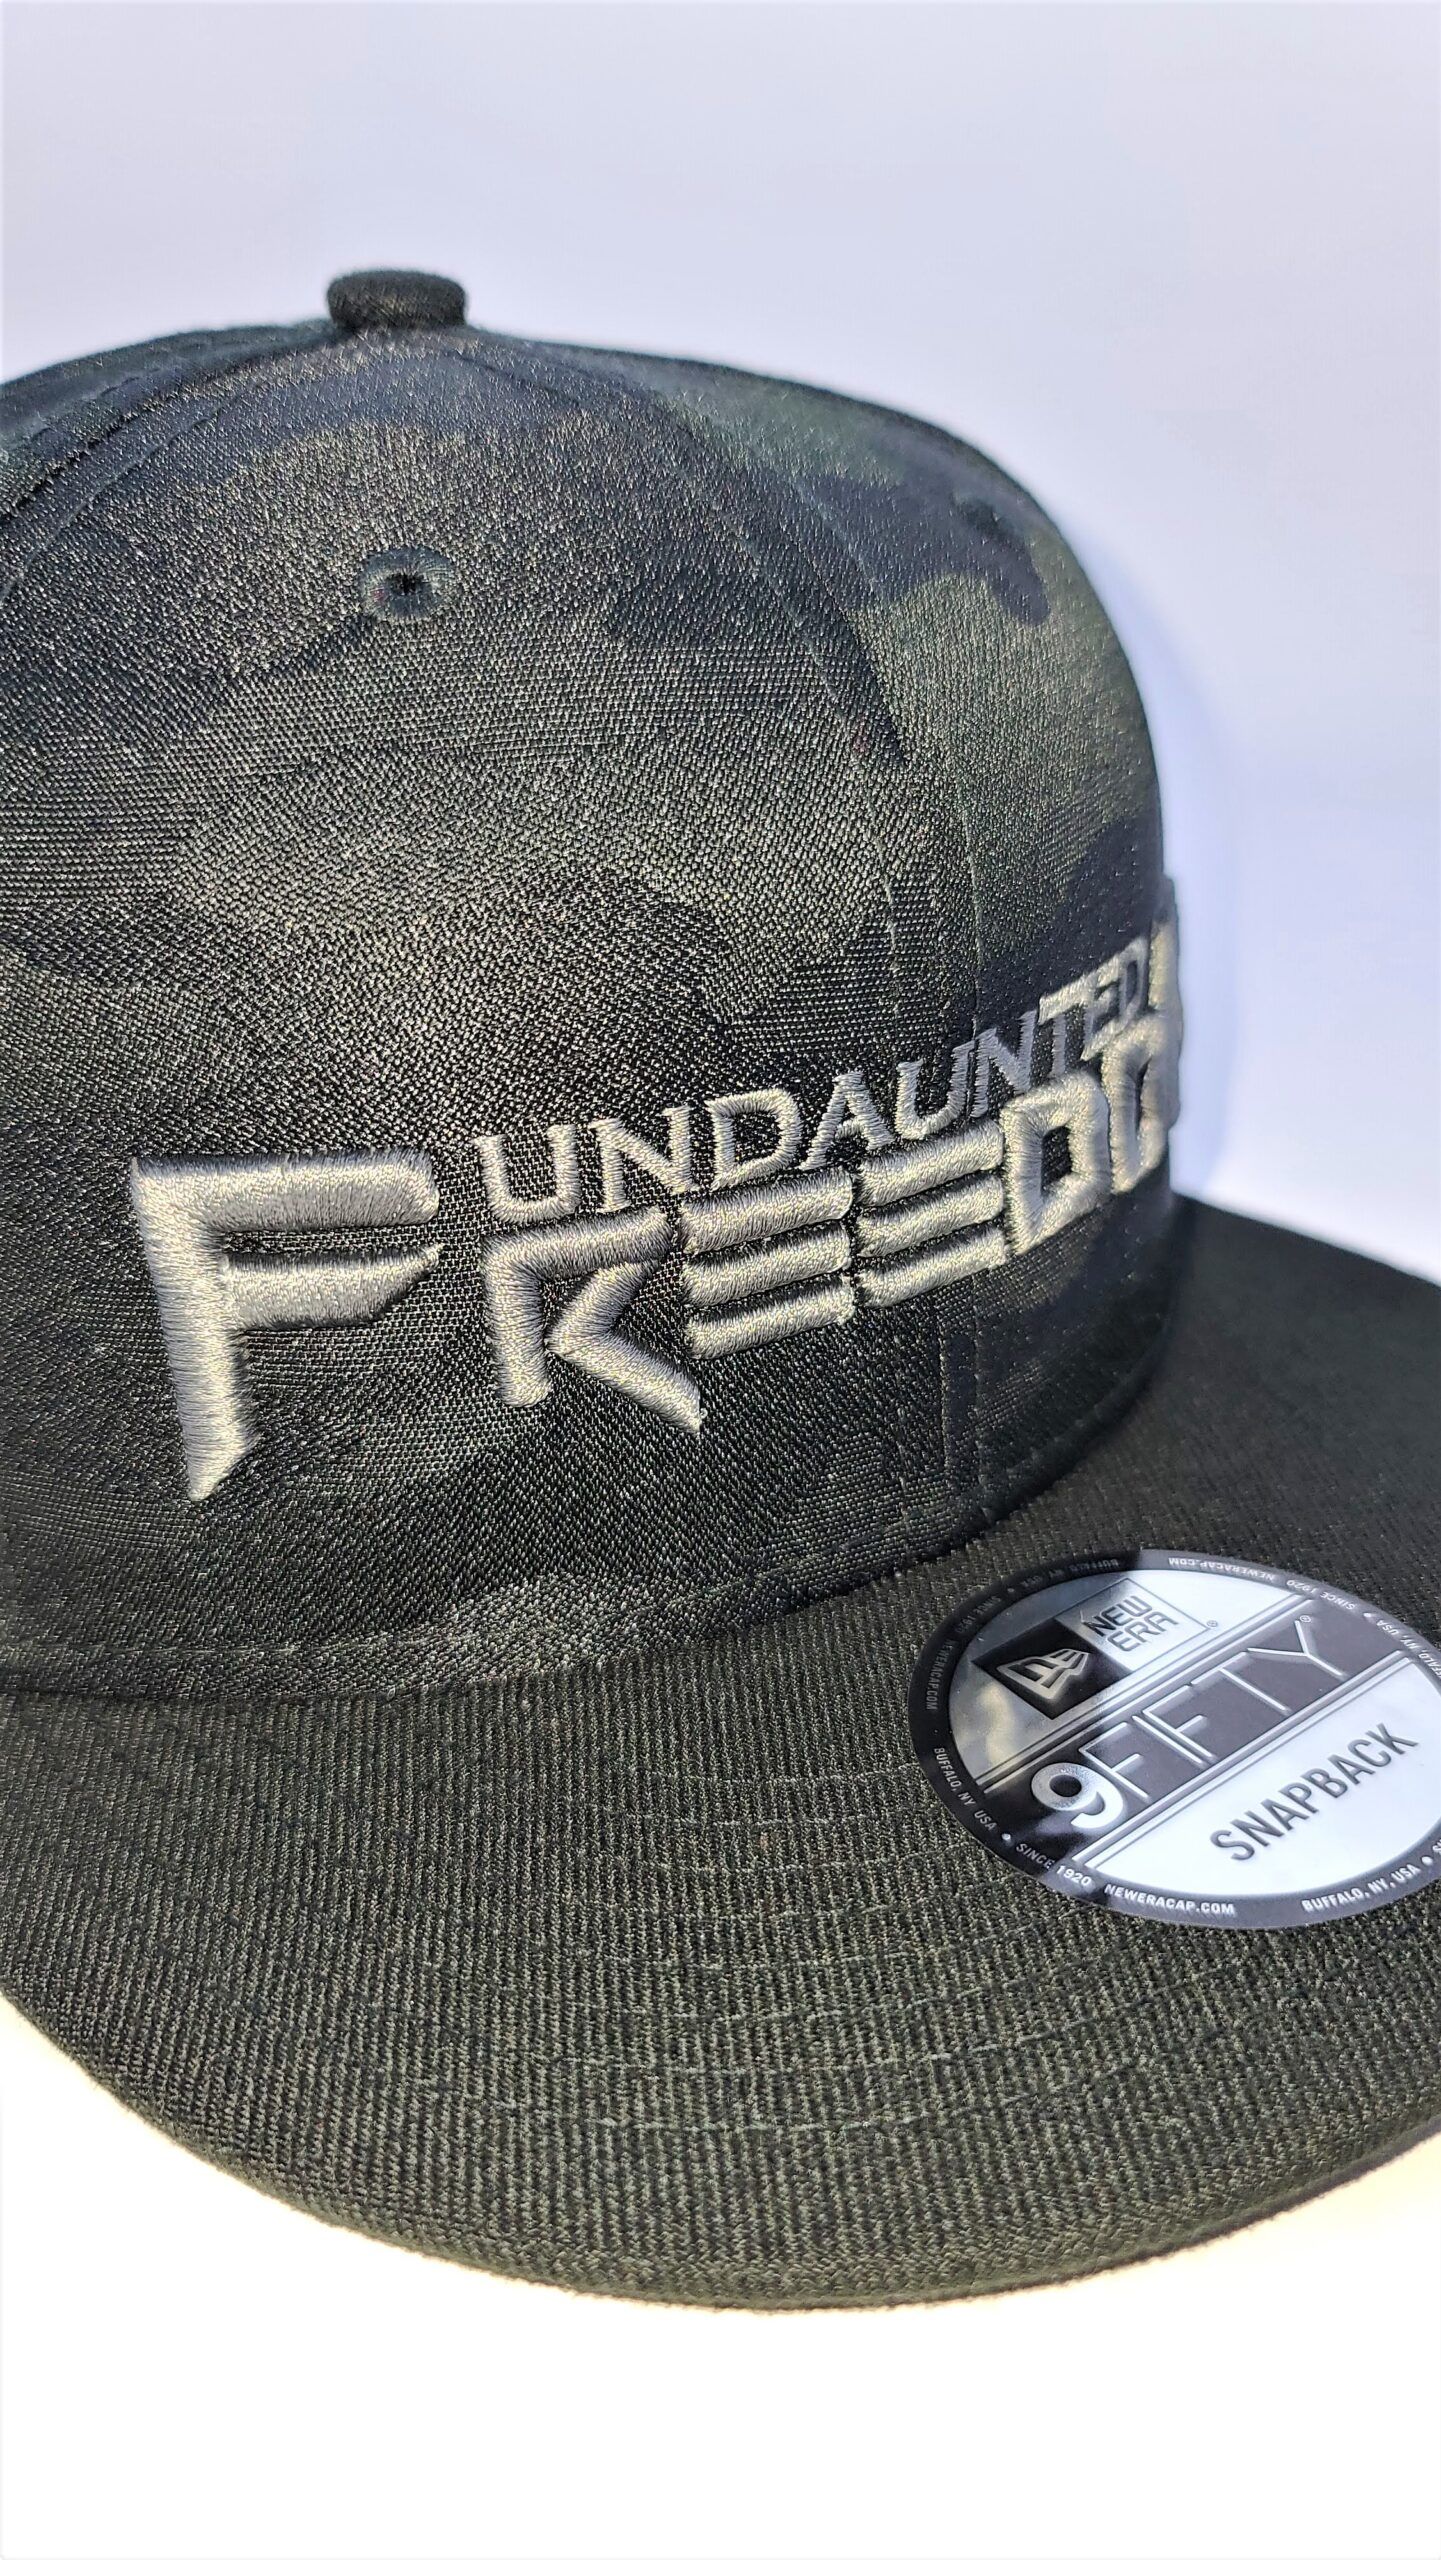 Undaunted Freedom Hat - Be Undaunted; Wear What Matters